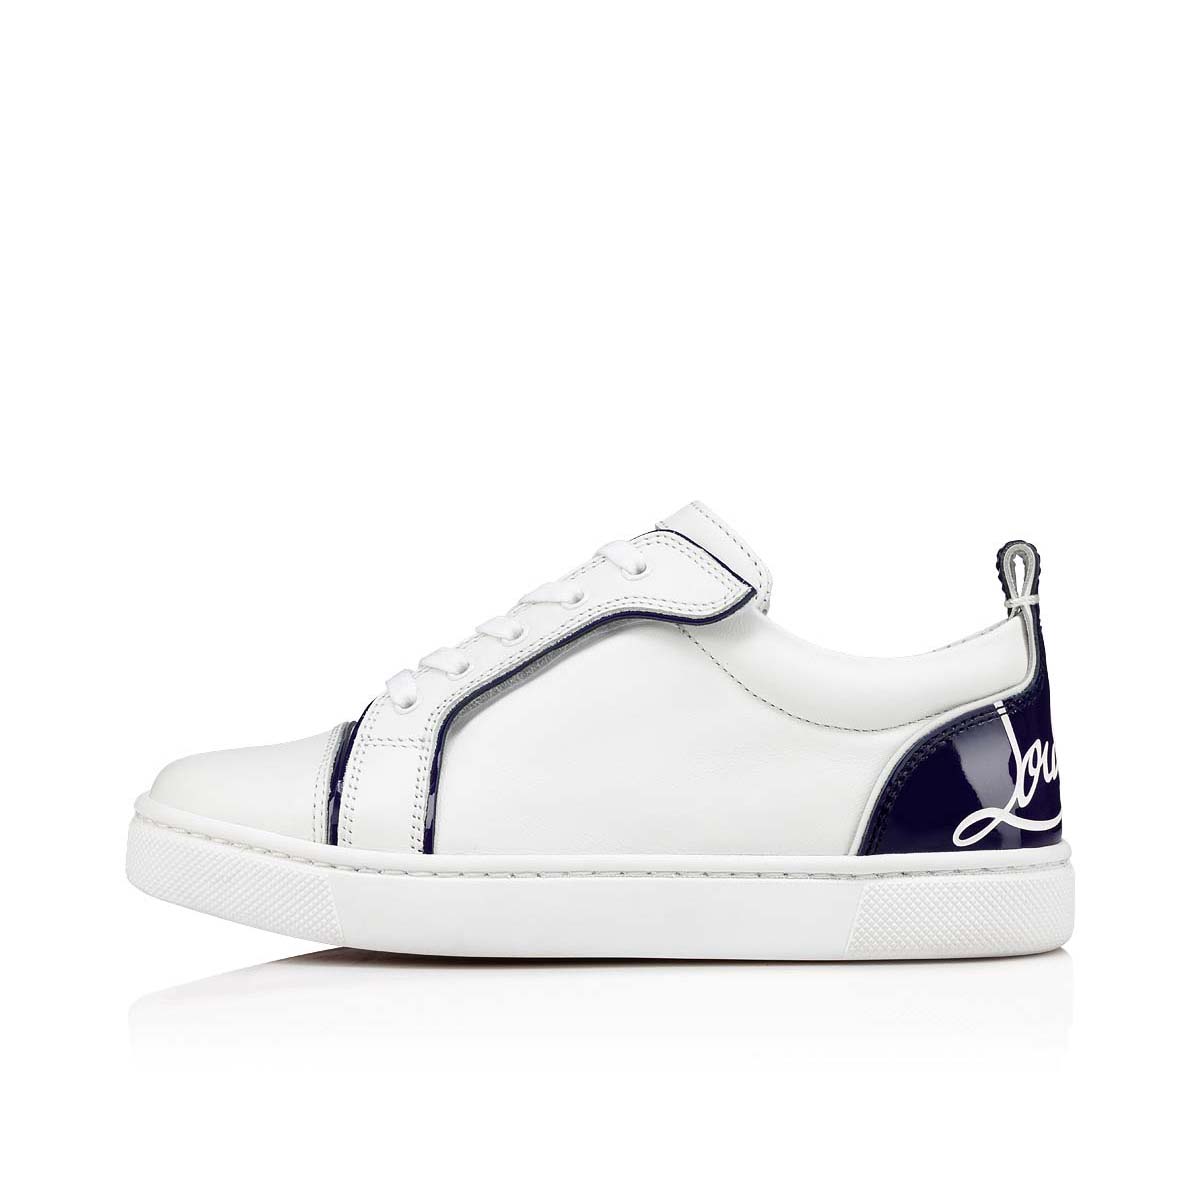 Trainers Christian Louboutin - Woven sneakers in white and blue -  1210845CMA3